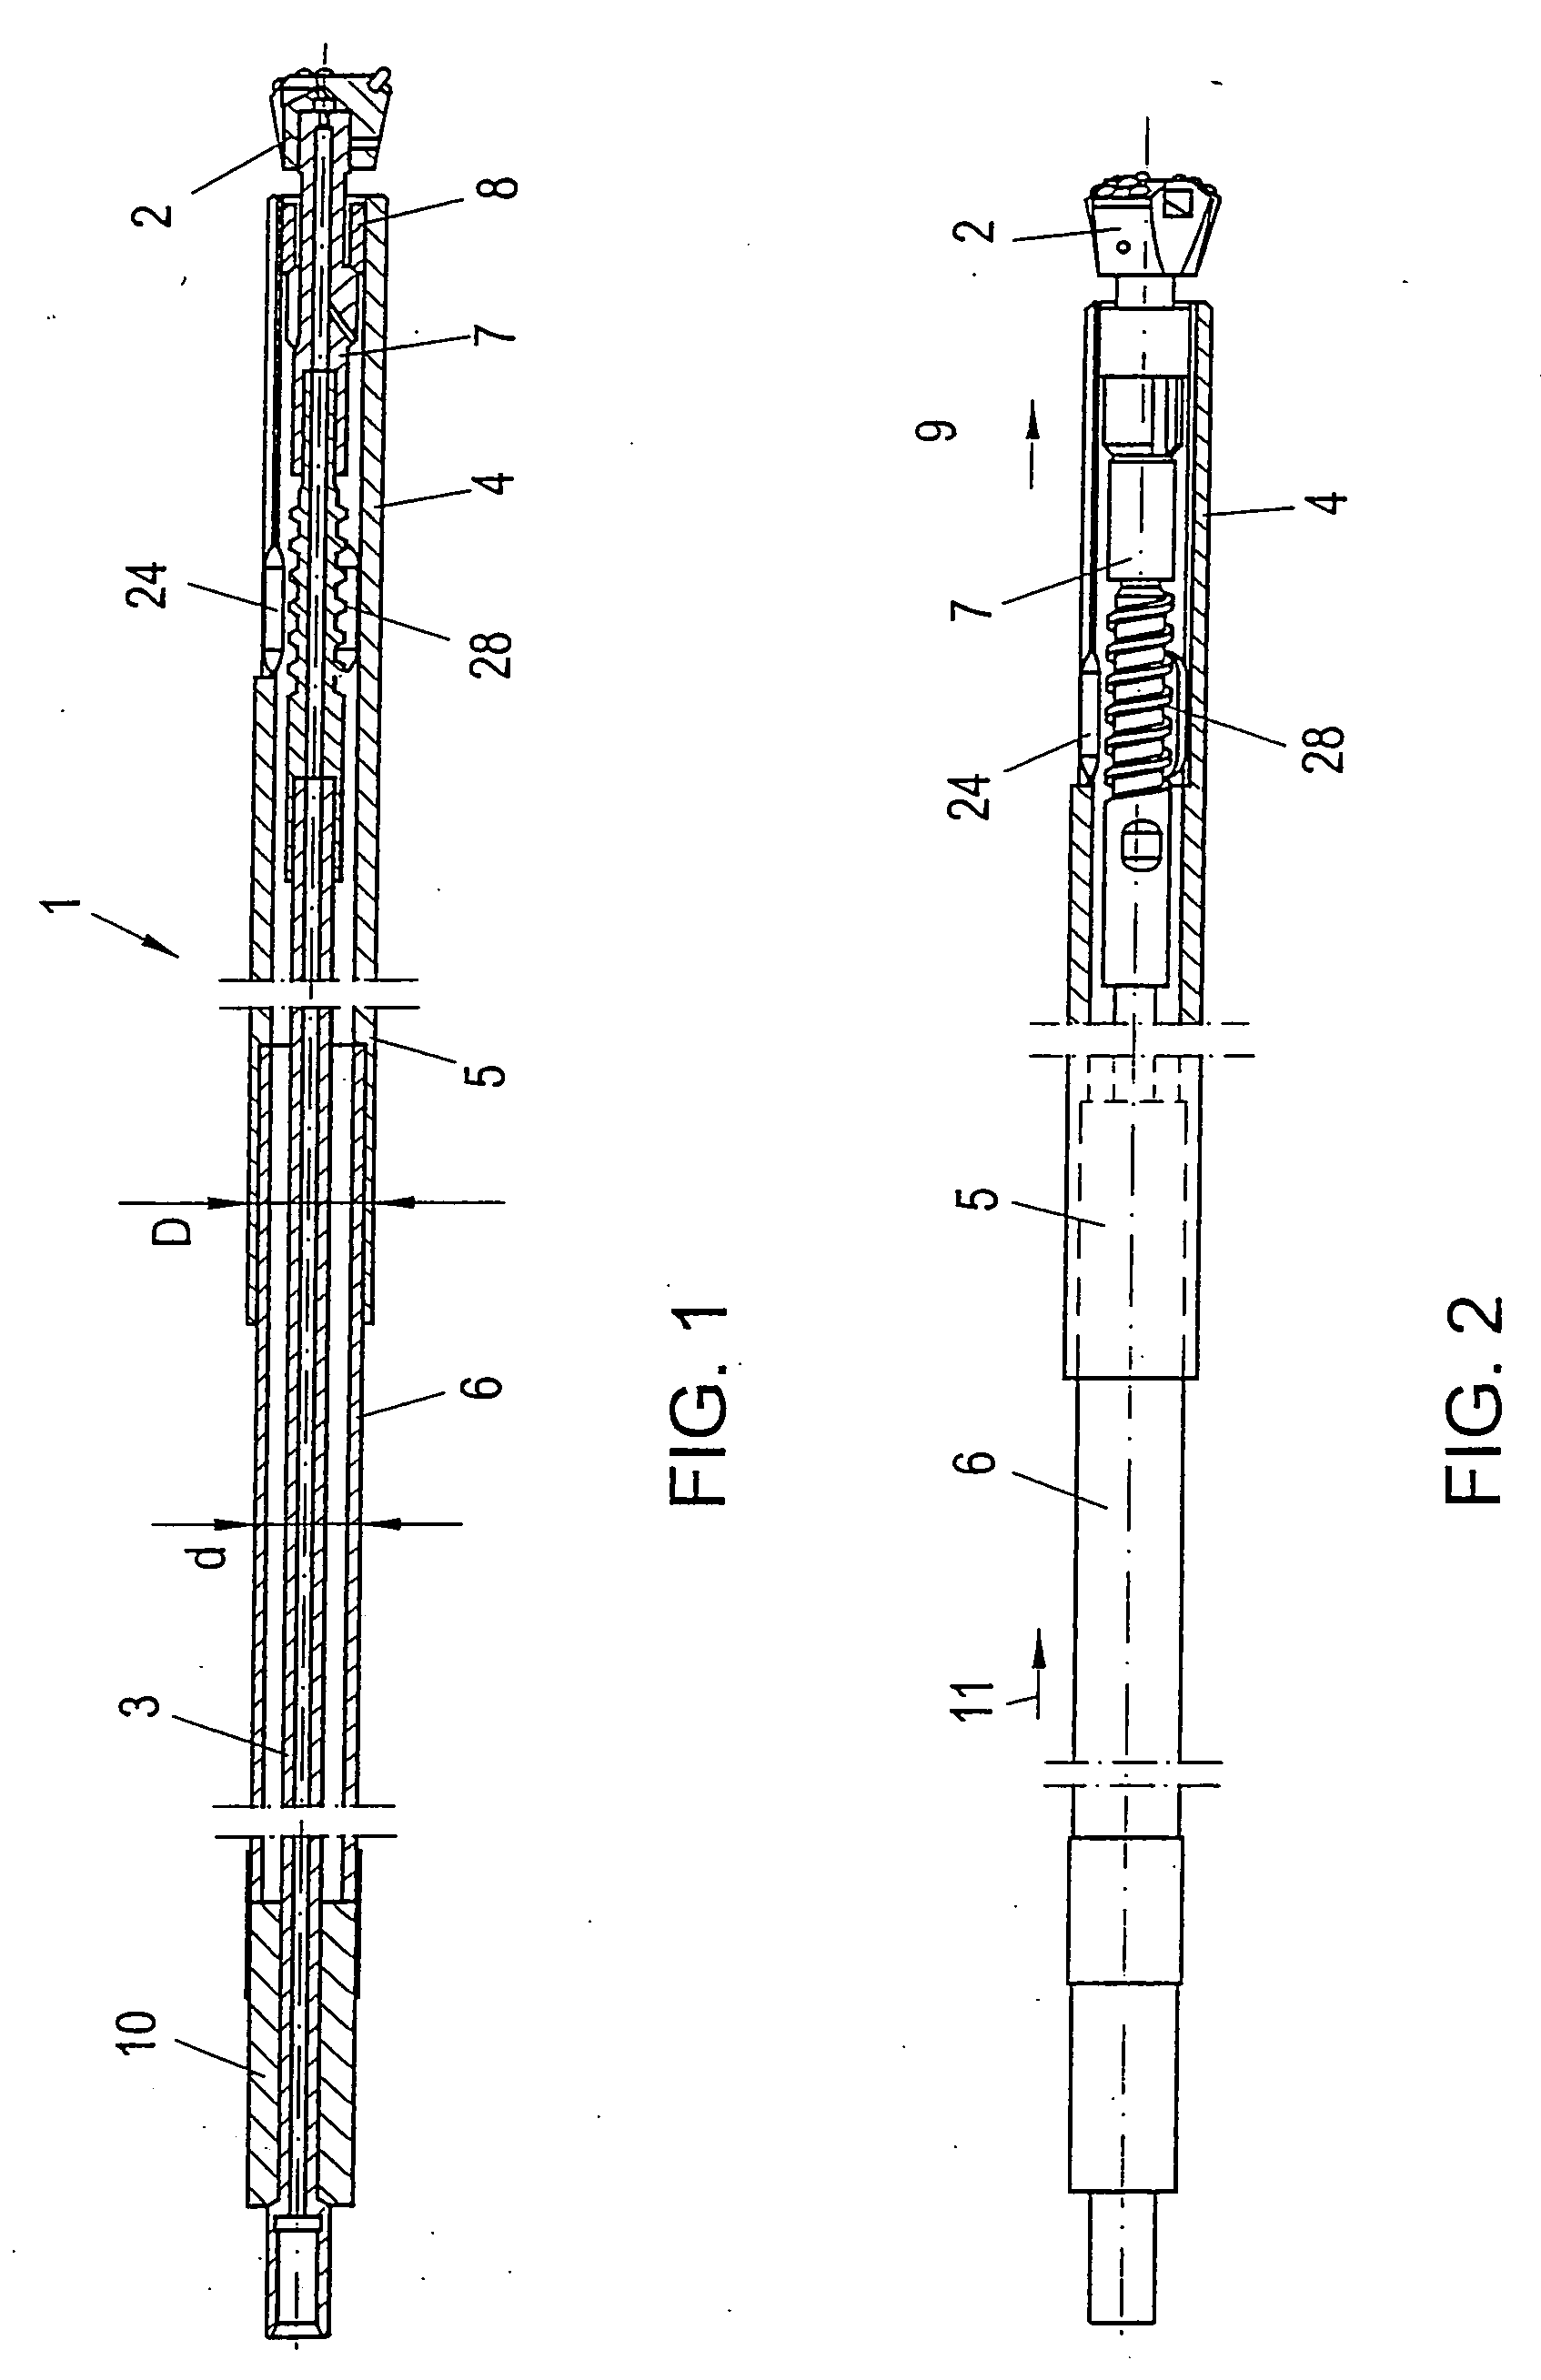 Method and device for boring holes in soil or rock